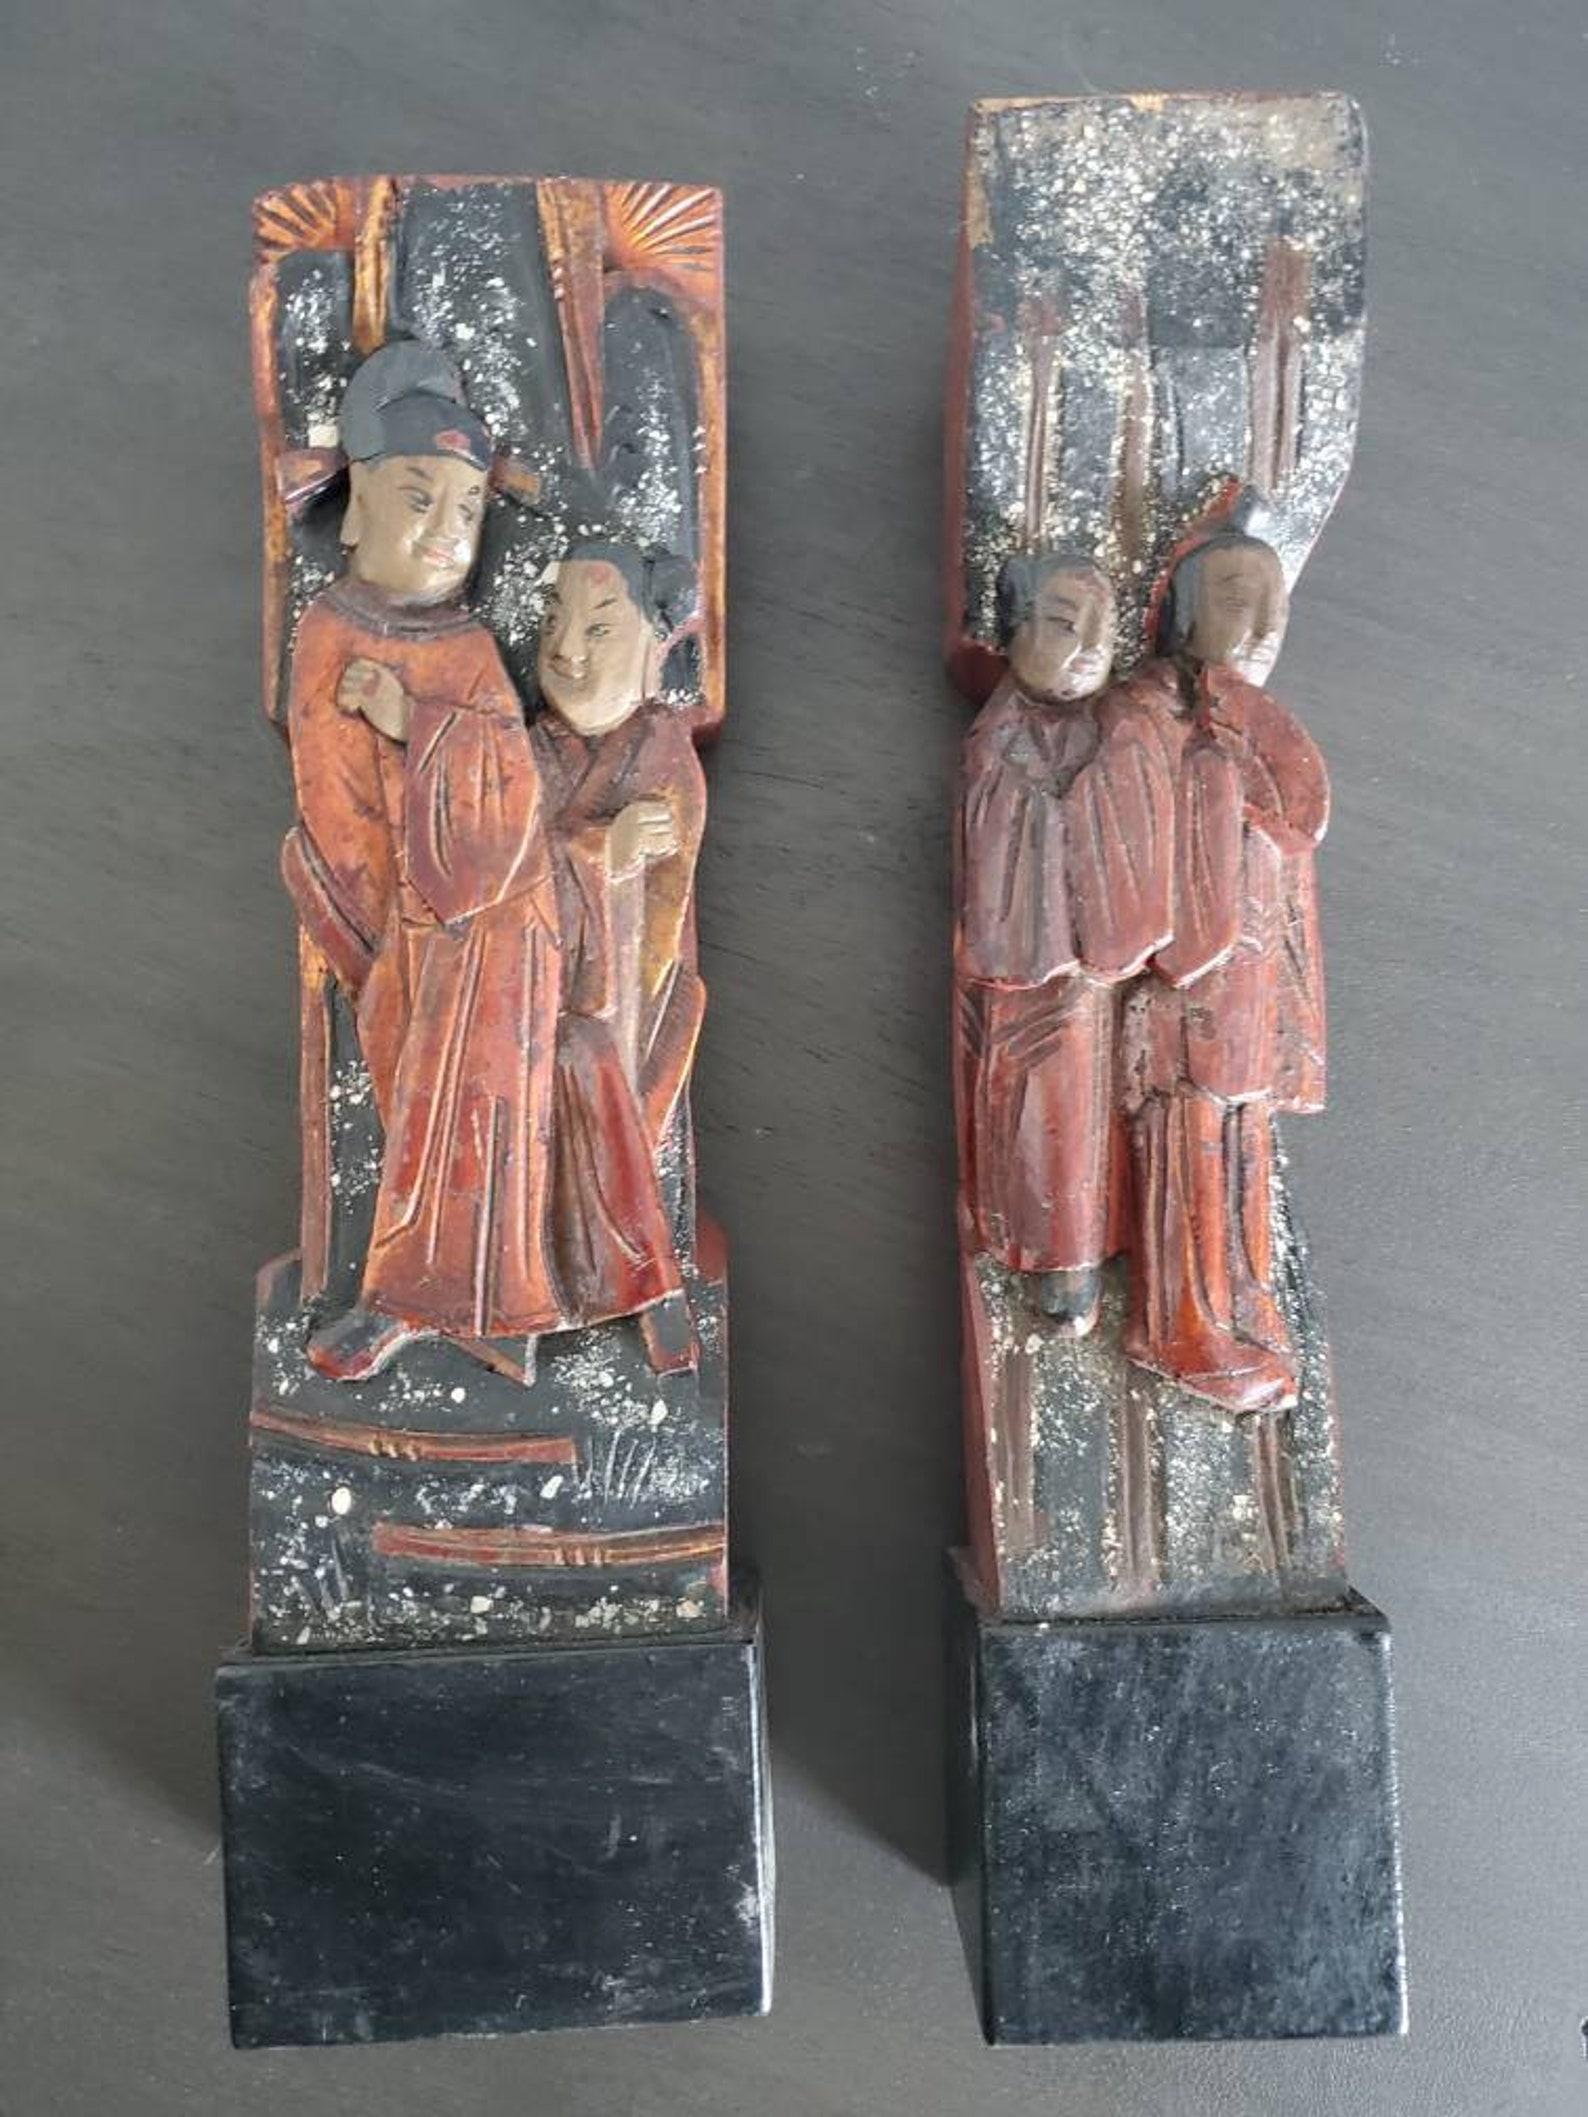 A scarce pair of Qing Dynasty temple architectural ornaments, the decorative antique building element fragments each elaborately hand carved, polychrome painted and lacquered, richly detailed featuring two figural pairs accented by beautiful,